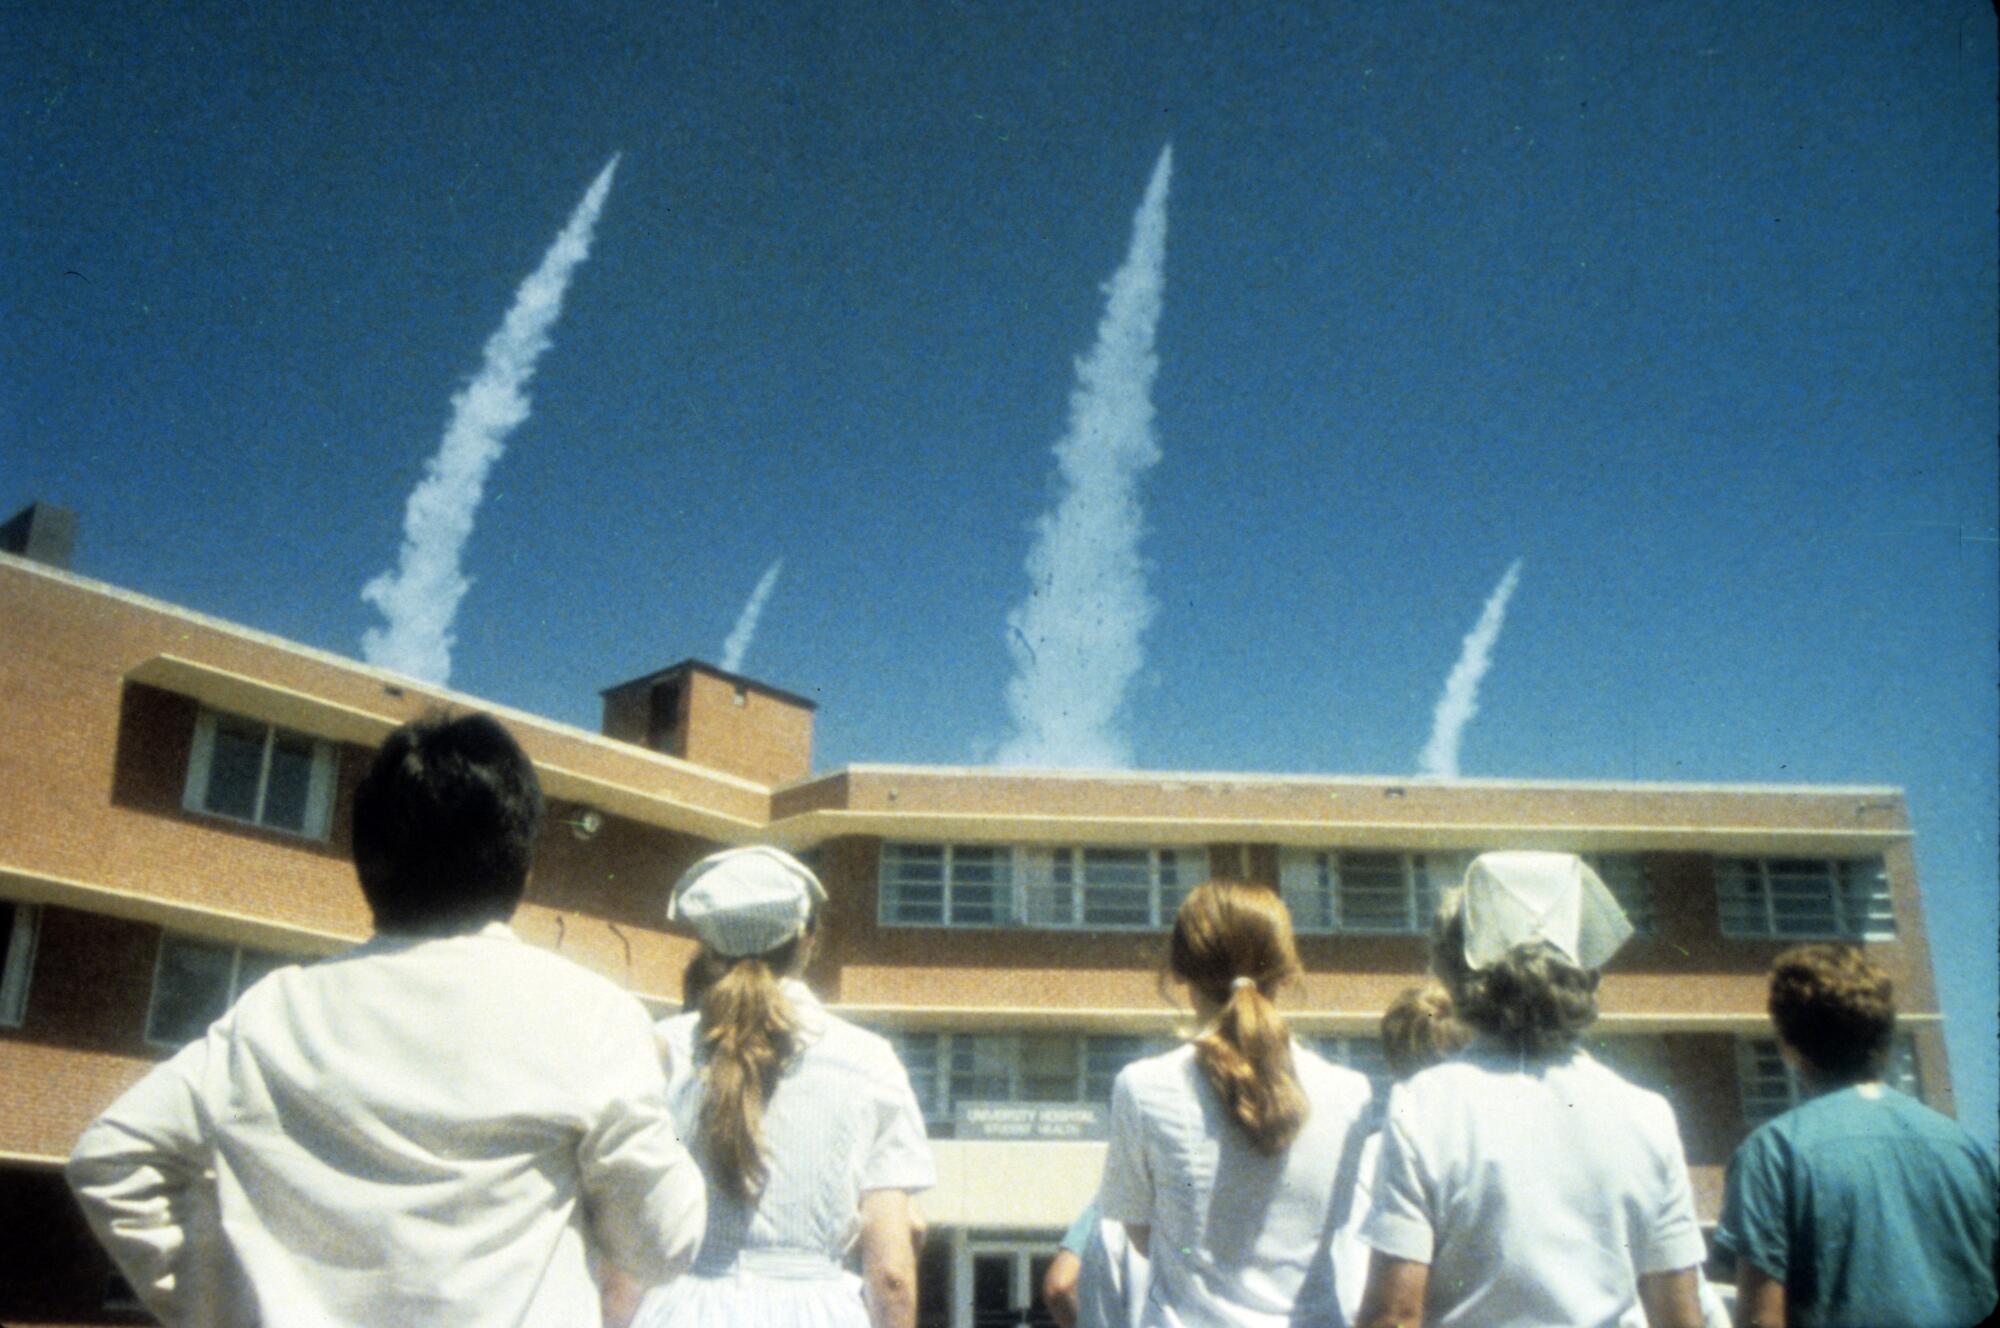 People watch missiles launching overhead in the movie "The Day After."